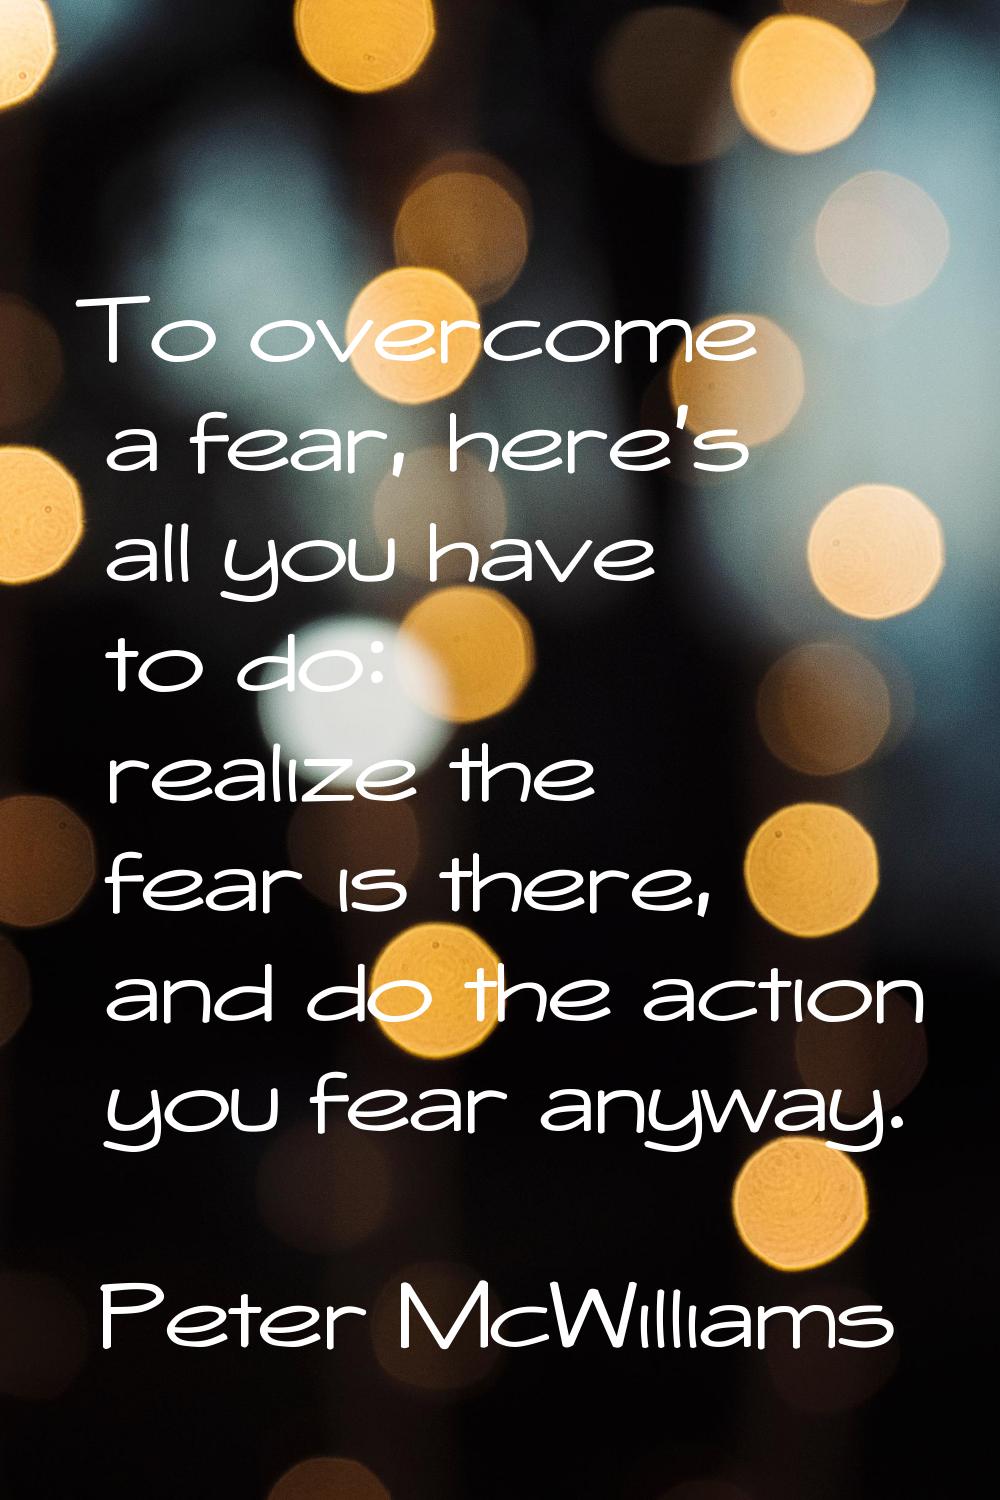 To overcome a fear, here's all you have to do: realize the fear is there, and do the action you fea